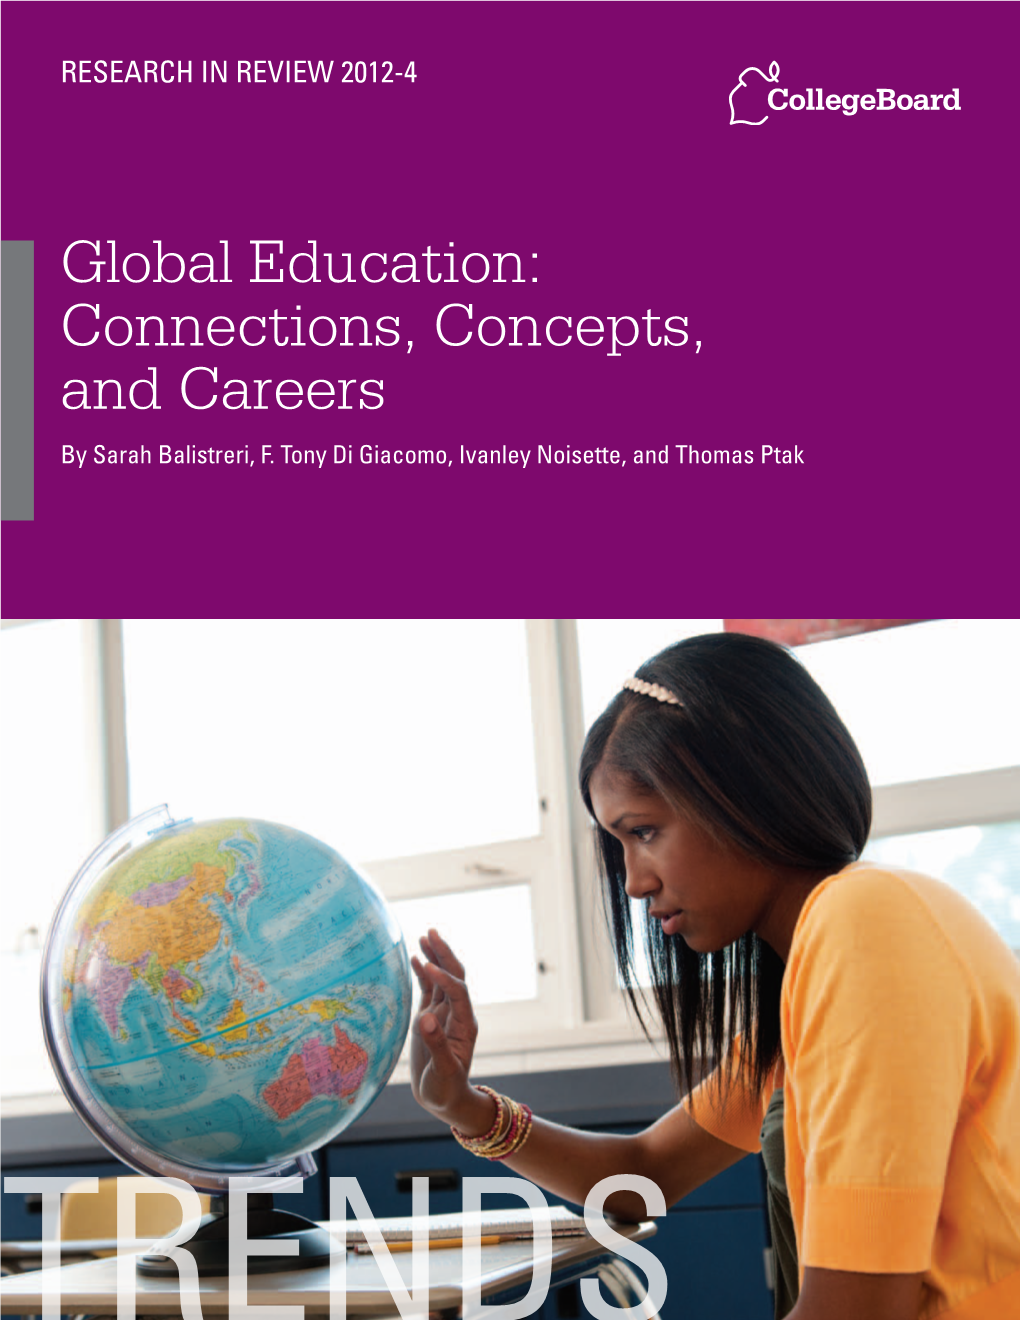 Global Education: Connections, Concepts, and Careers by Sarah Balistreri, F